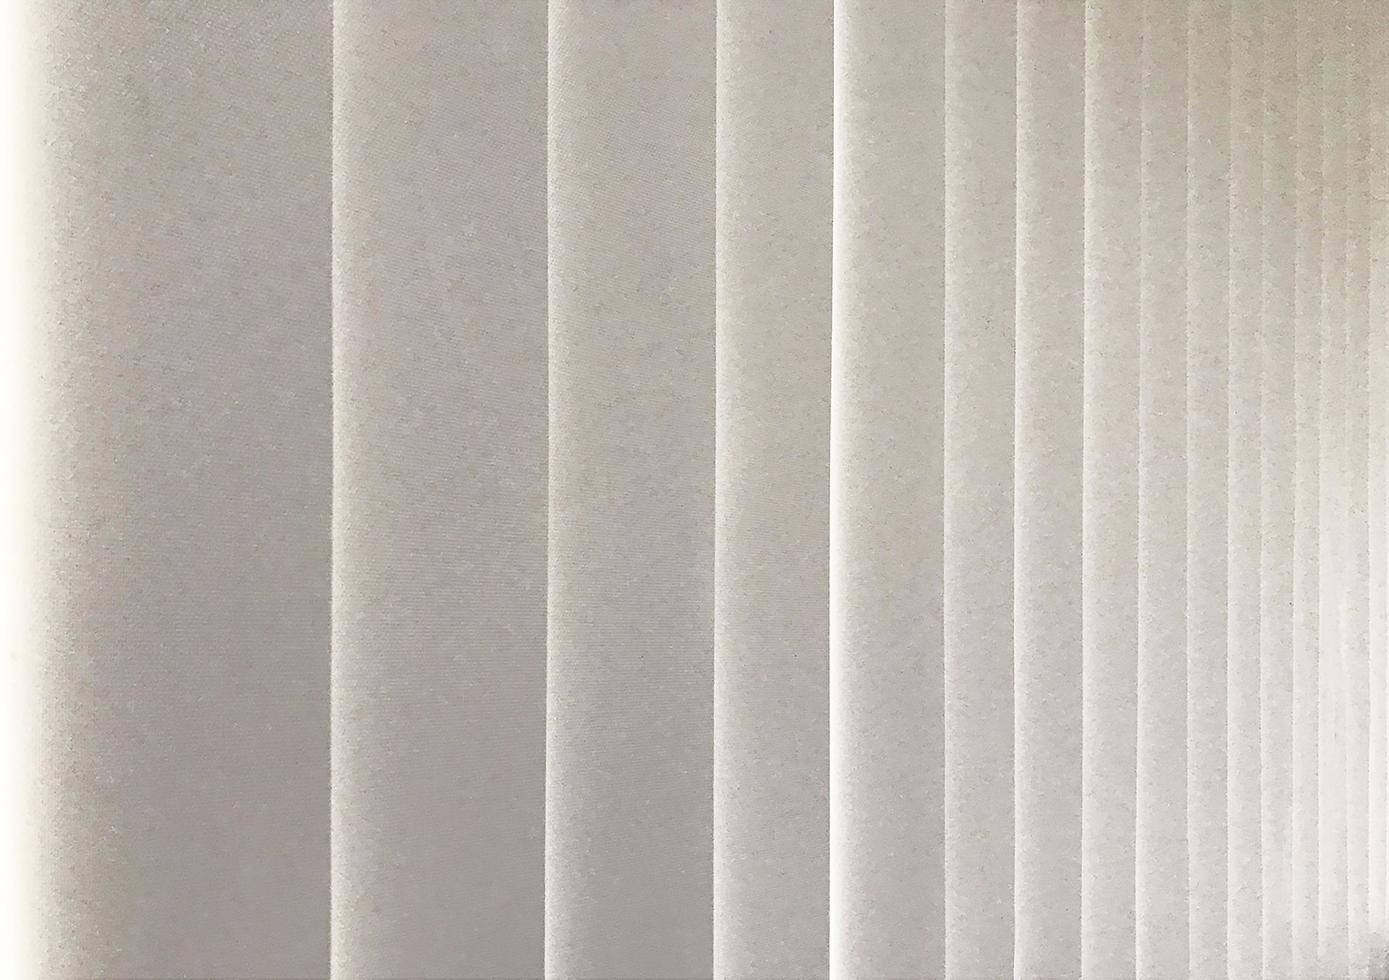 Window blind pattern abstract photo